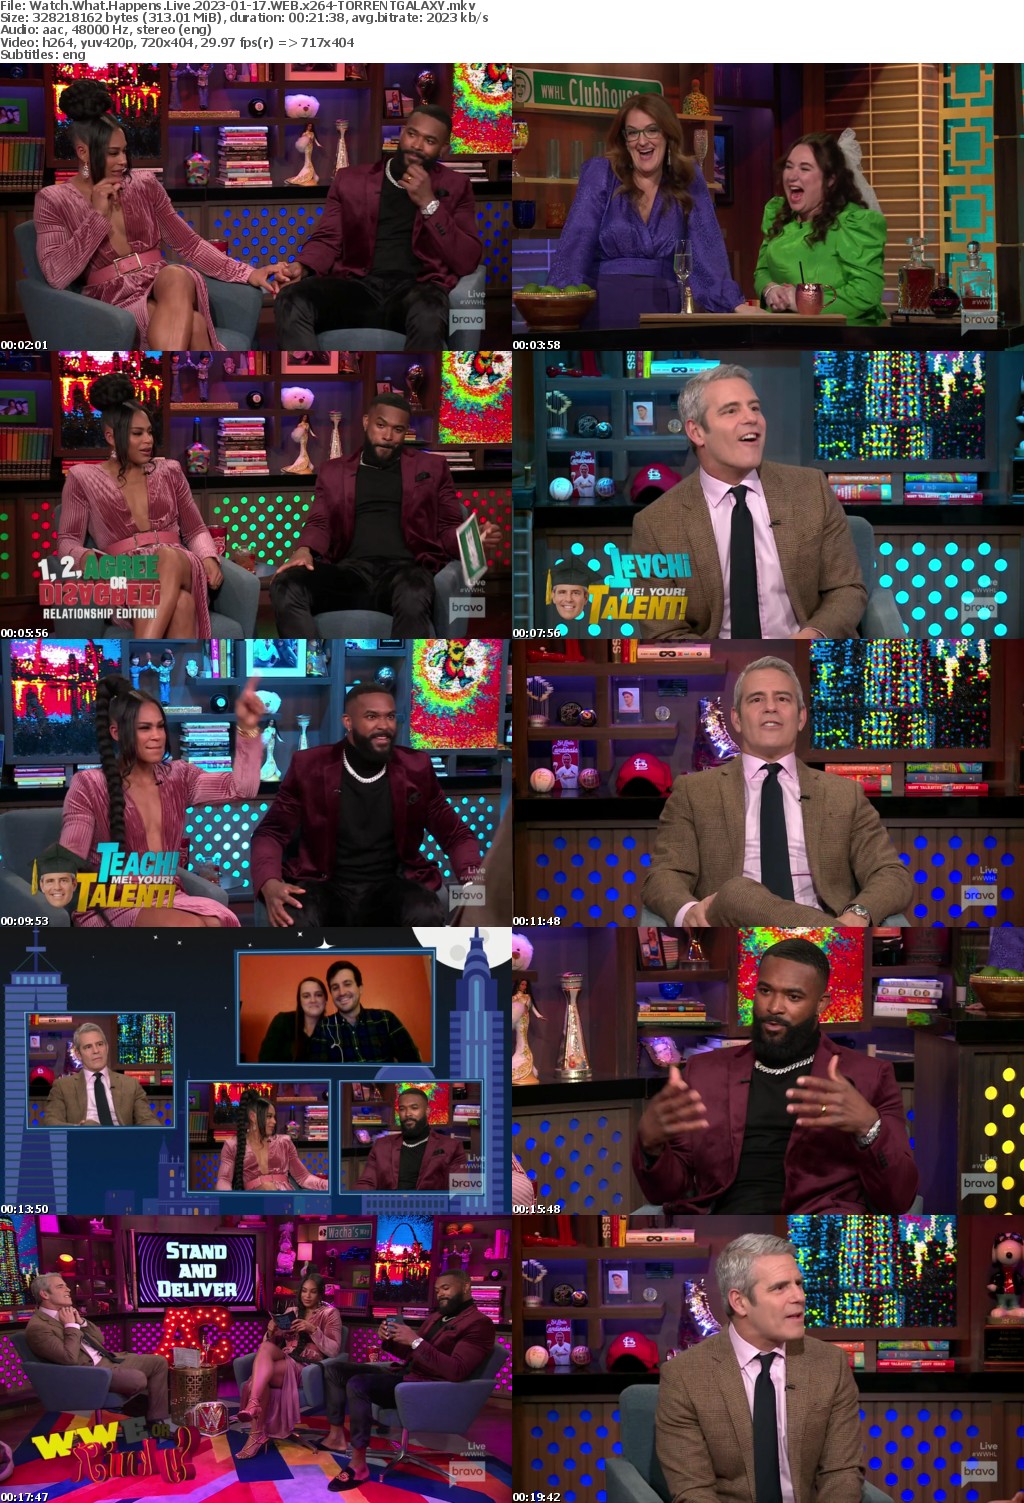 Watch What Happens Live 2023-01-17 WEB x264-GALAXY